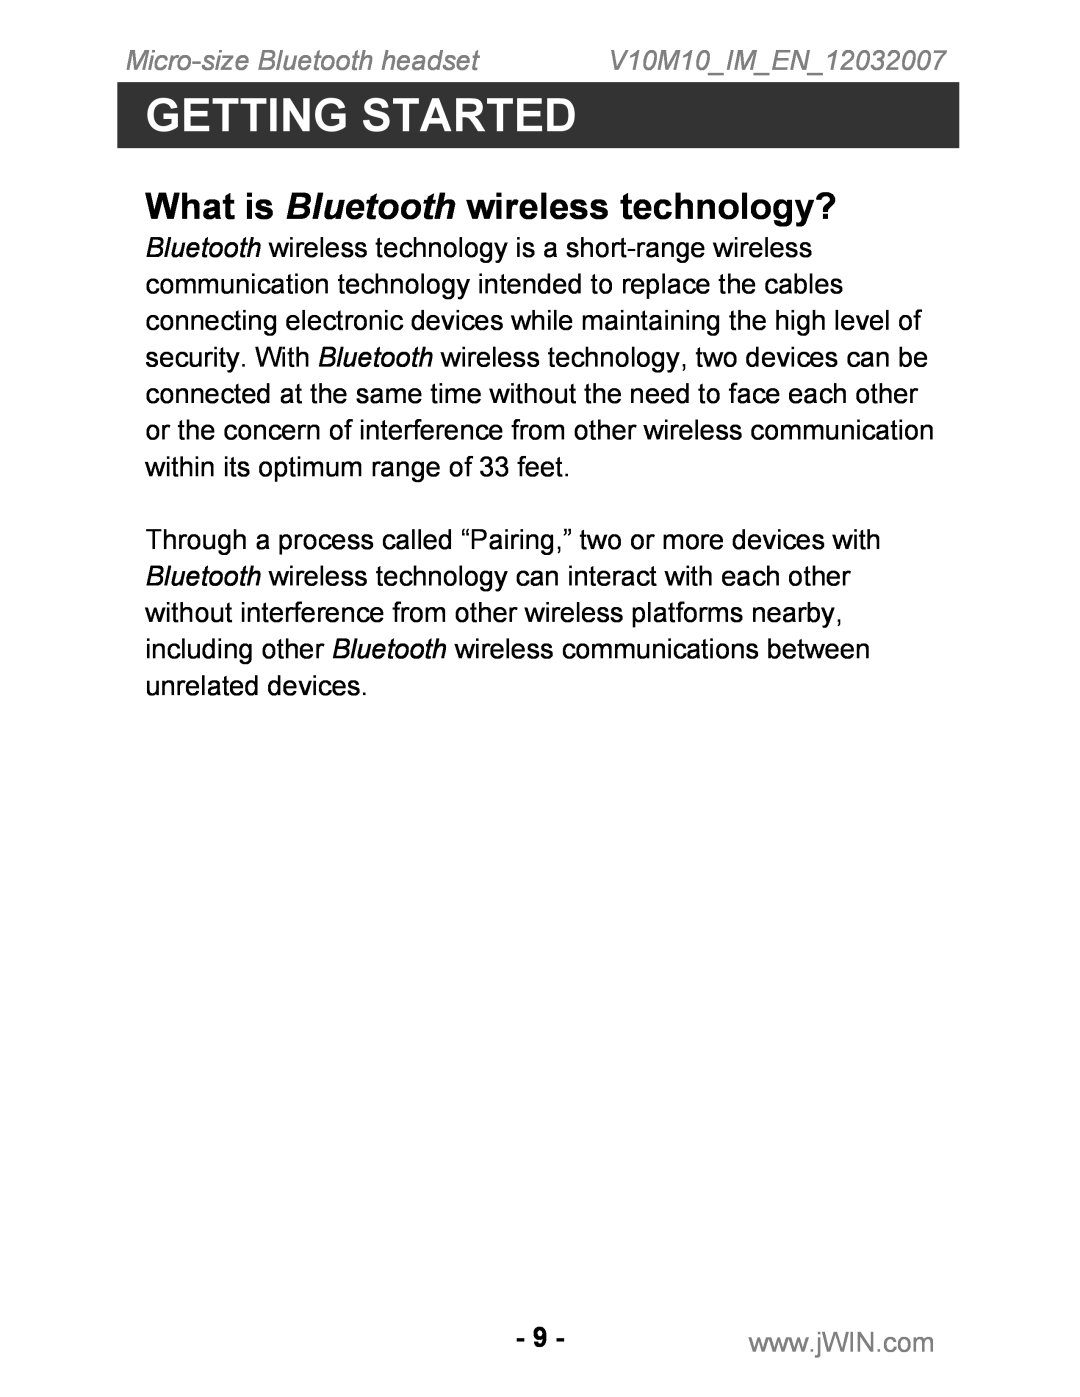 Jwin JB-TH210 instruction manual What is Bluetooth wireless technology?, Getting Started, Micro-sizeBluetooth headset 